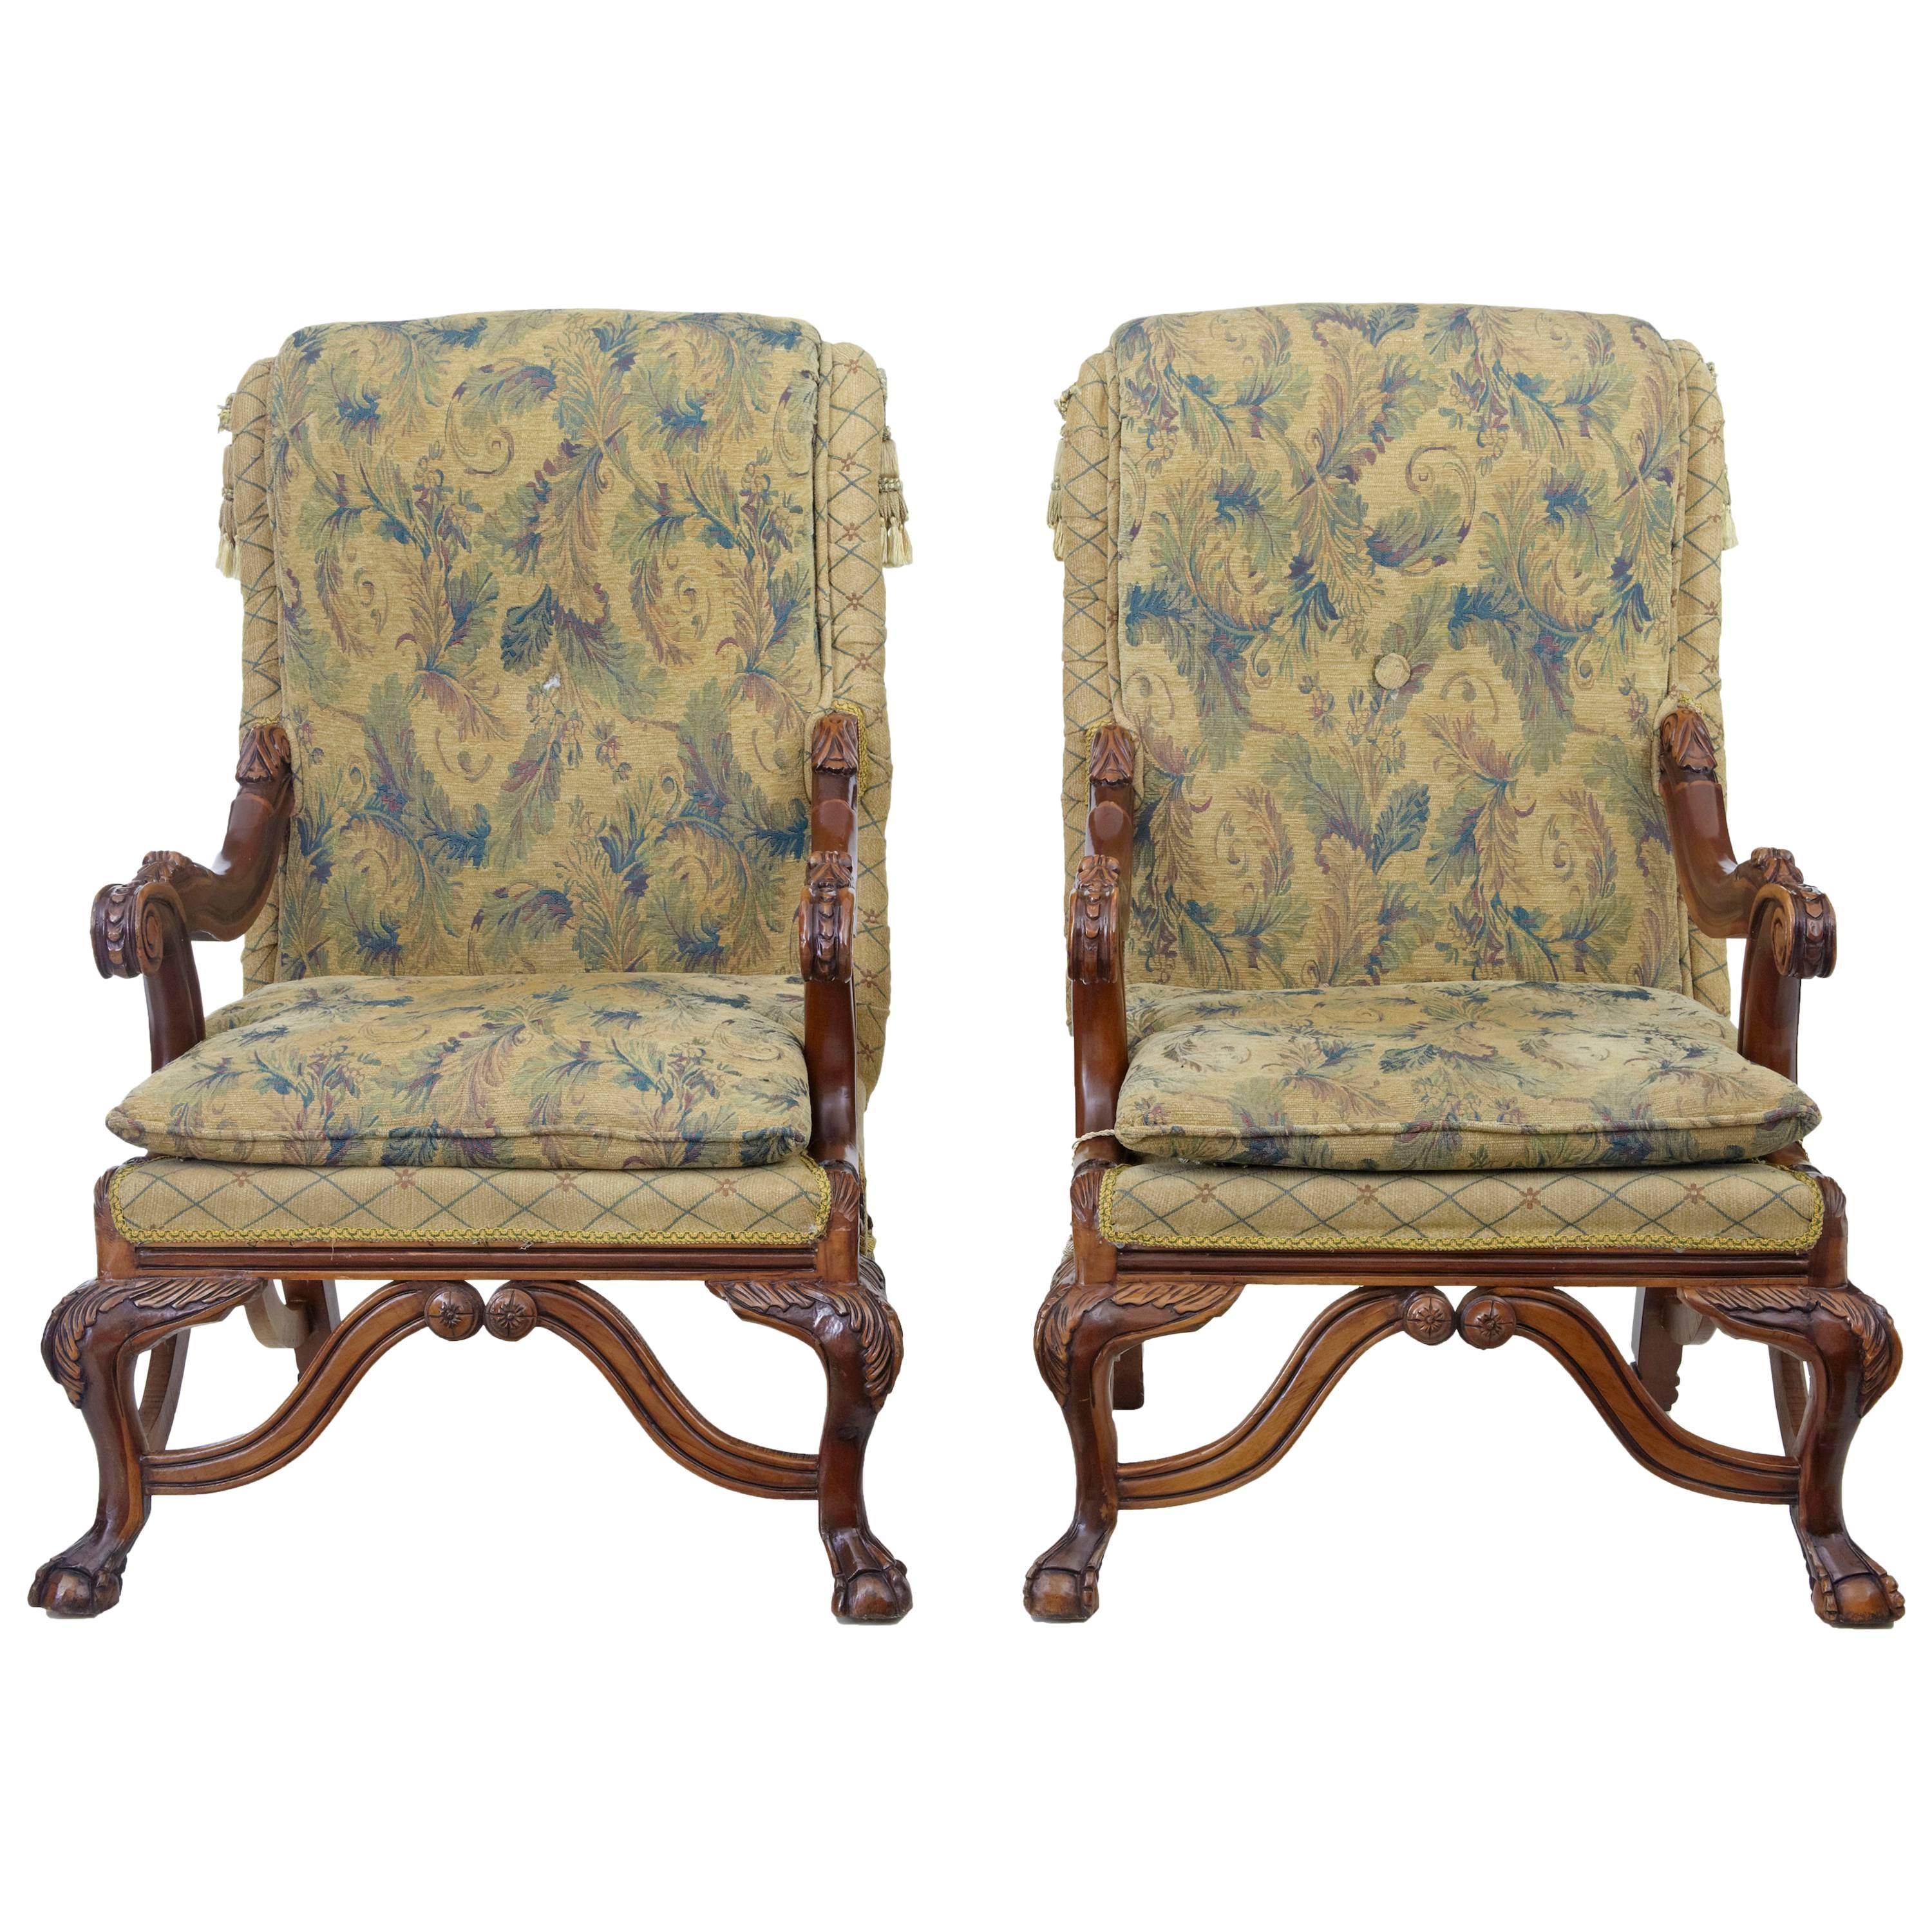 Large Pair of Carved Hardwood Throne Armchairs